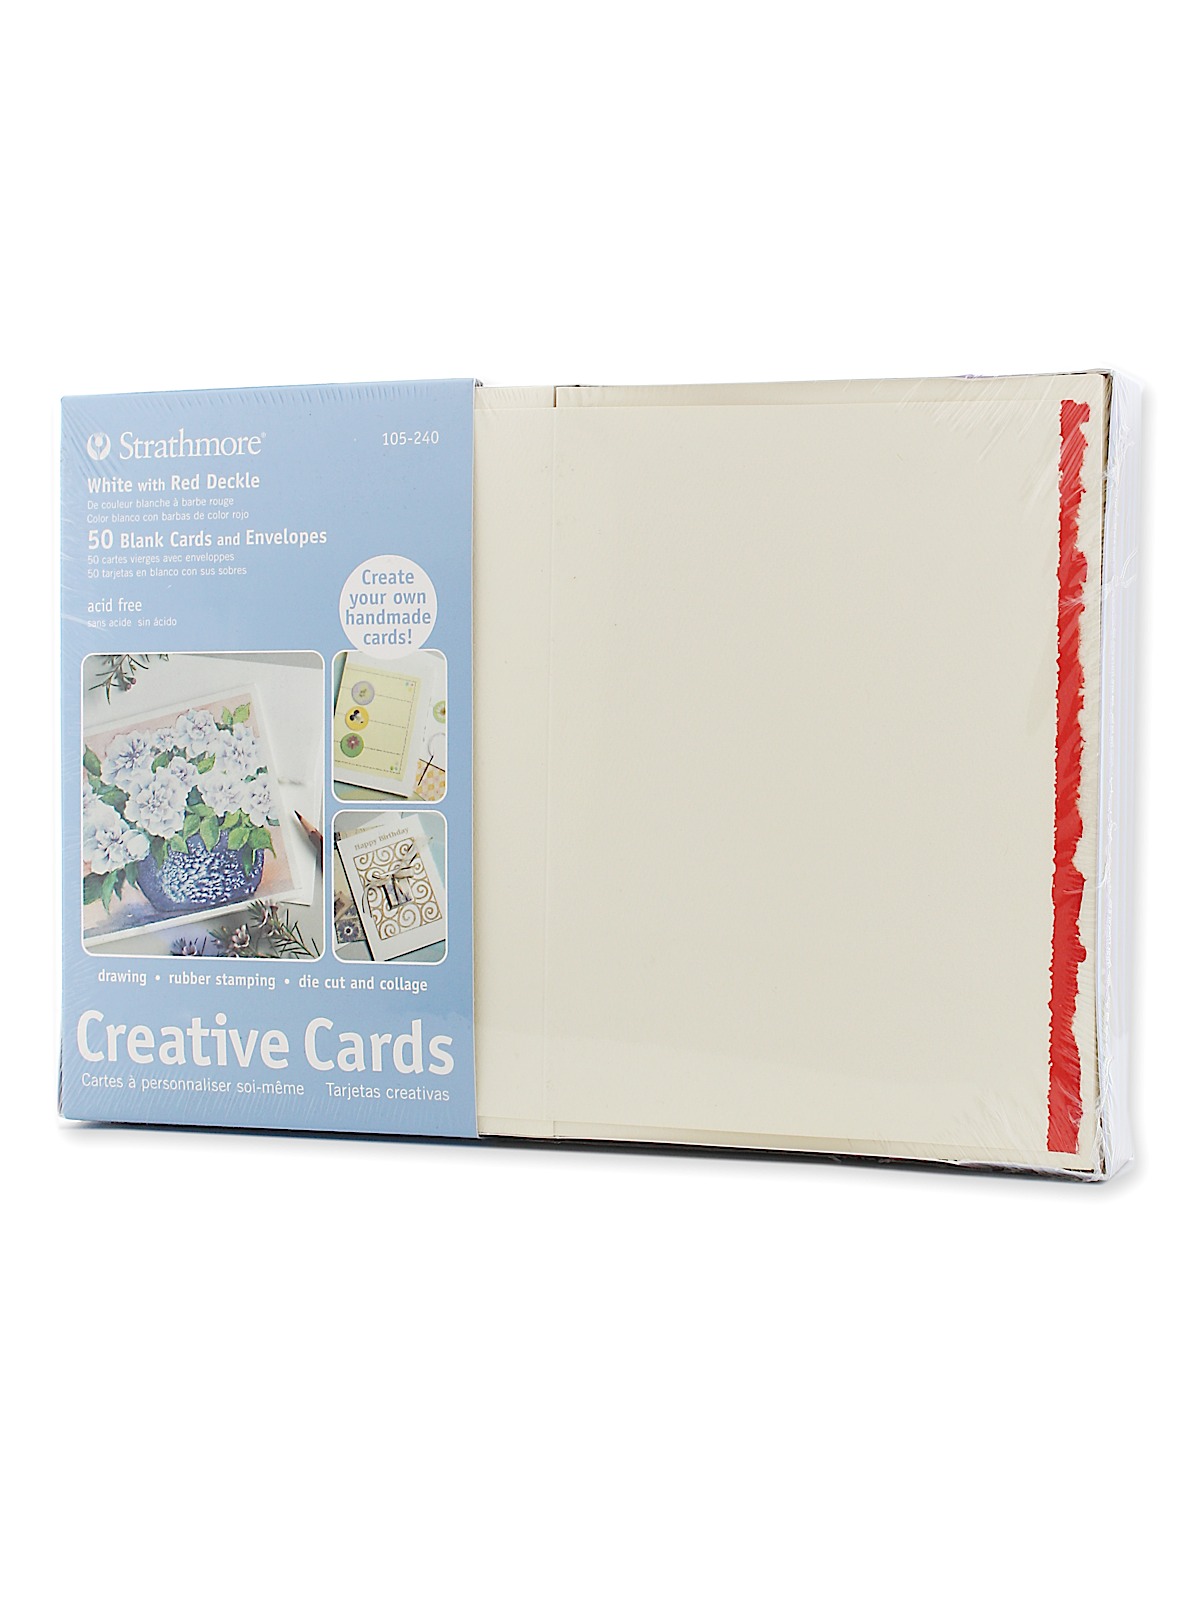 Blank Greeting Cards With Envelopes White With Red Deckle Pack Of 50